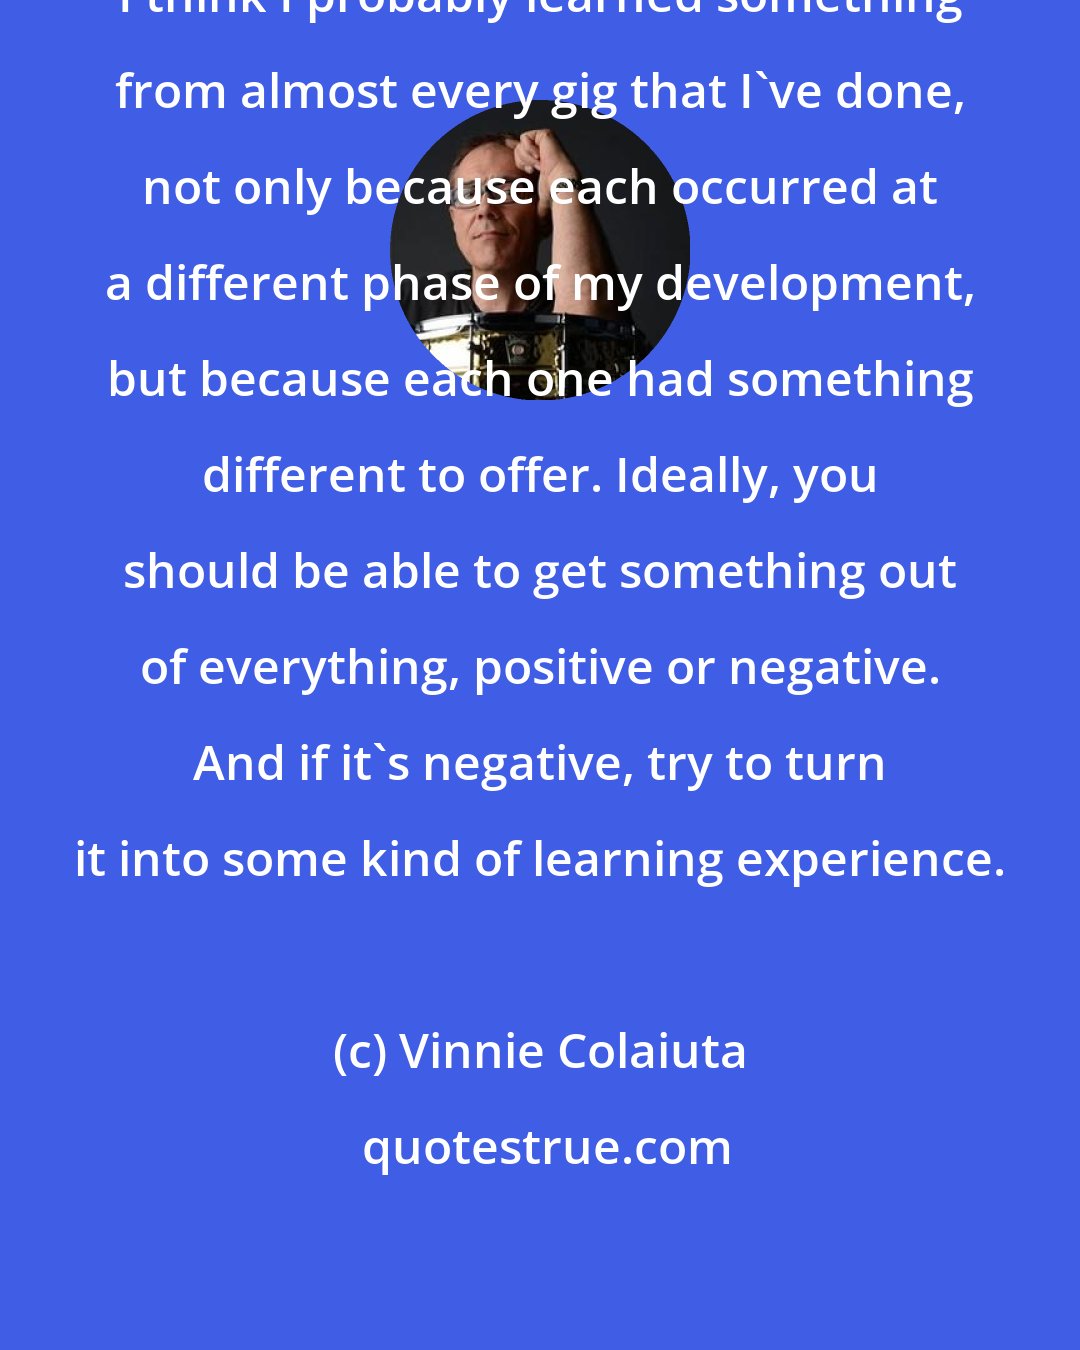 Vinnie Colaiuta: I think I probably learned something from almost every gig that I've done, not only because each occurred at a different phase of my development, but because each one had something different to offer. Ideally, you should be able to get something out of everything, positive or negative. And if it's negative, try to turn it into some kind of learning experience.